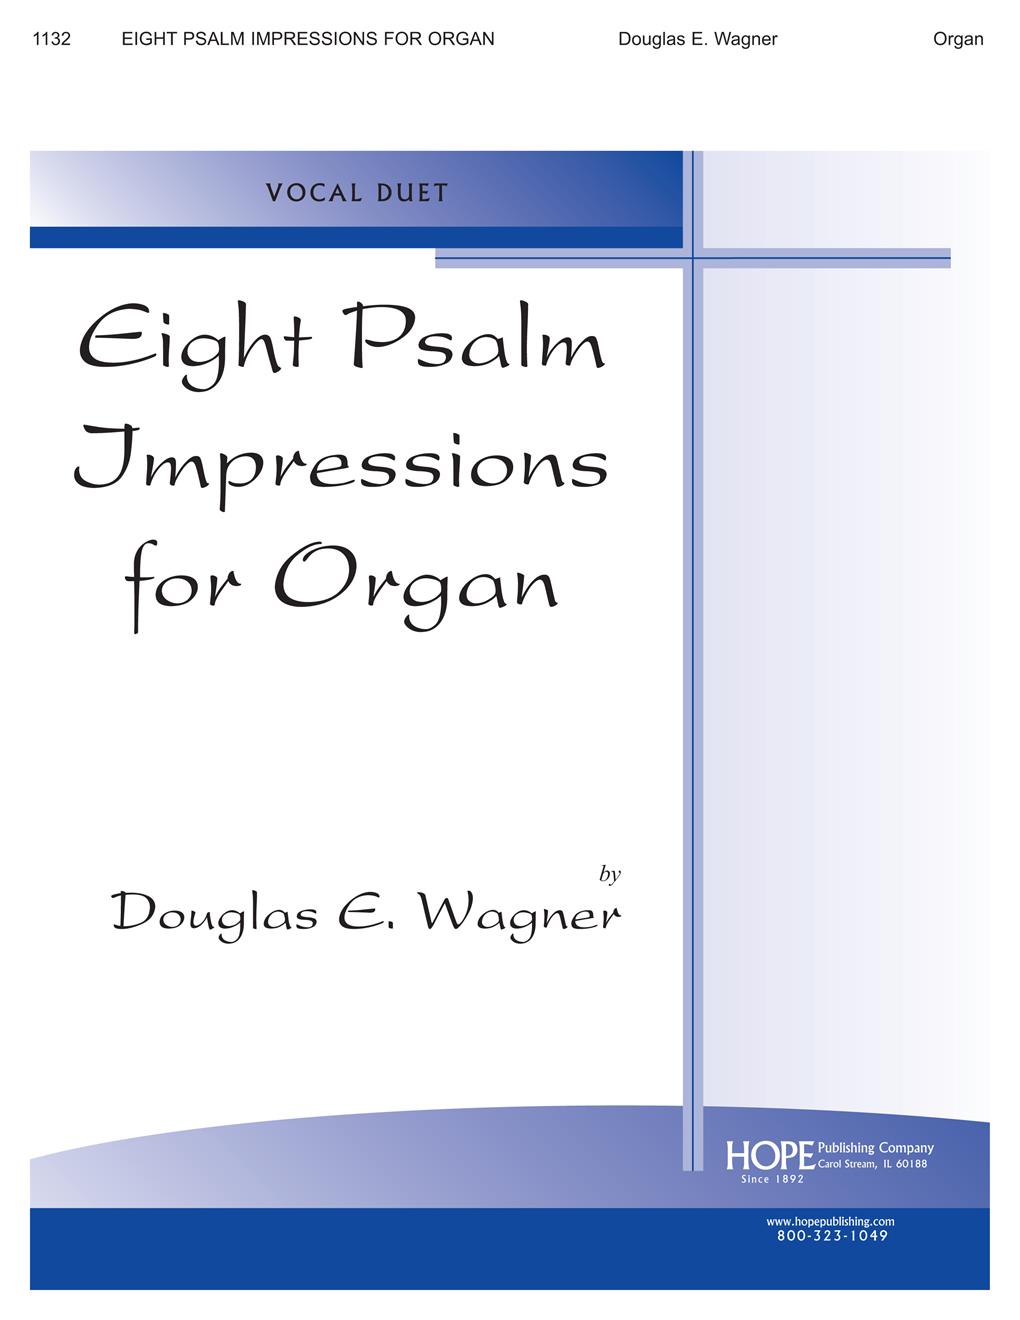 EIGHT PSALM IMPRESSIONS FOR ORGAN VOL. 1 - Cover Image